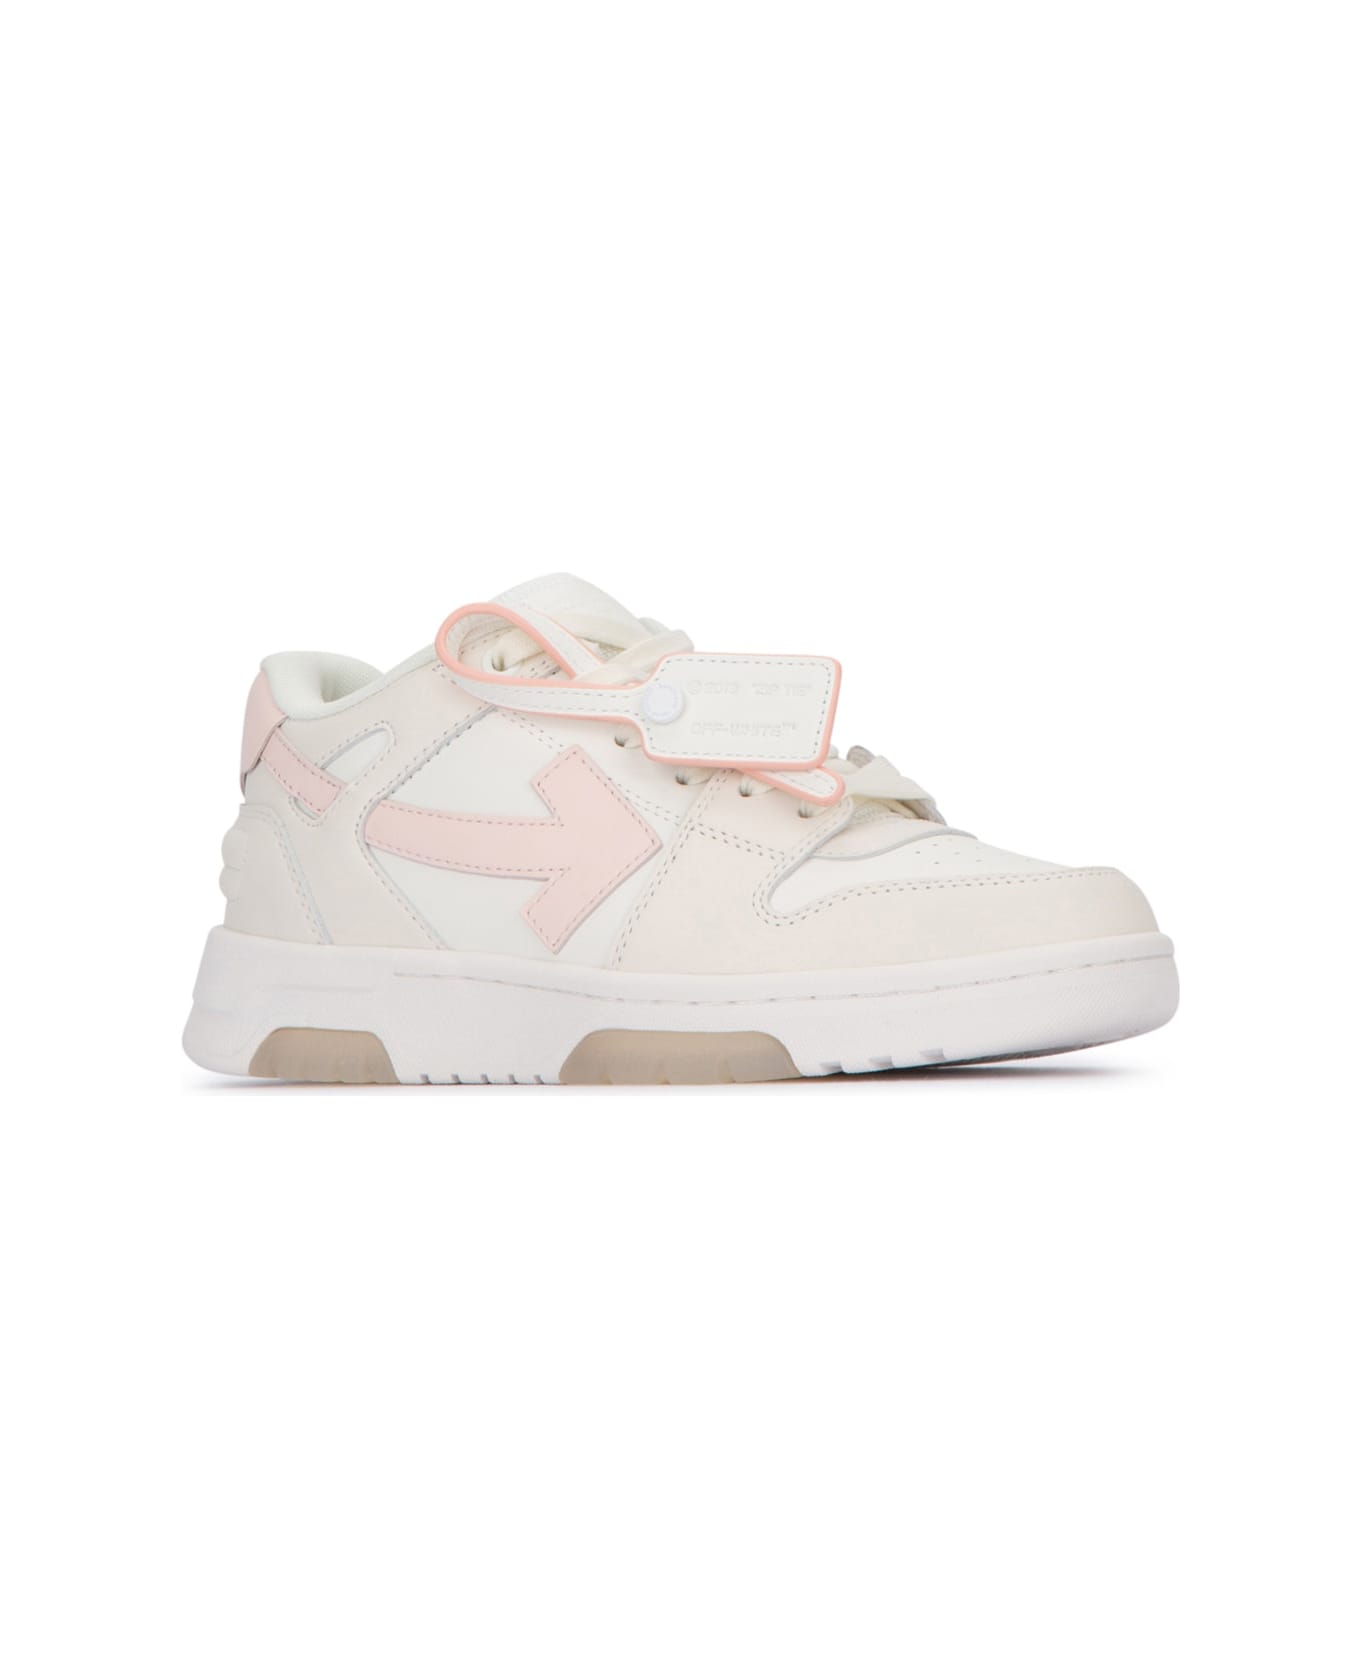 Off-White Sneakers - WHITEPINK